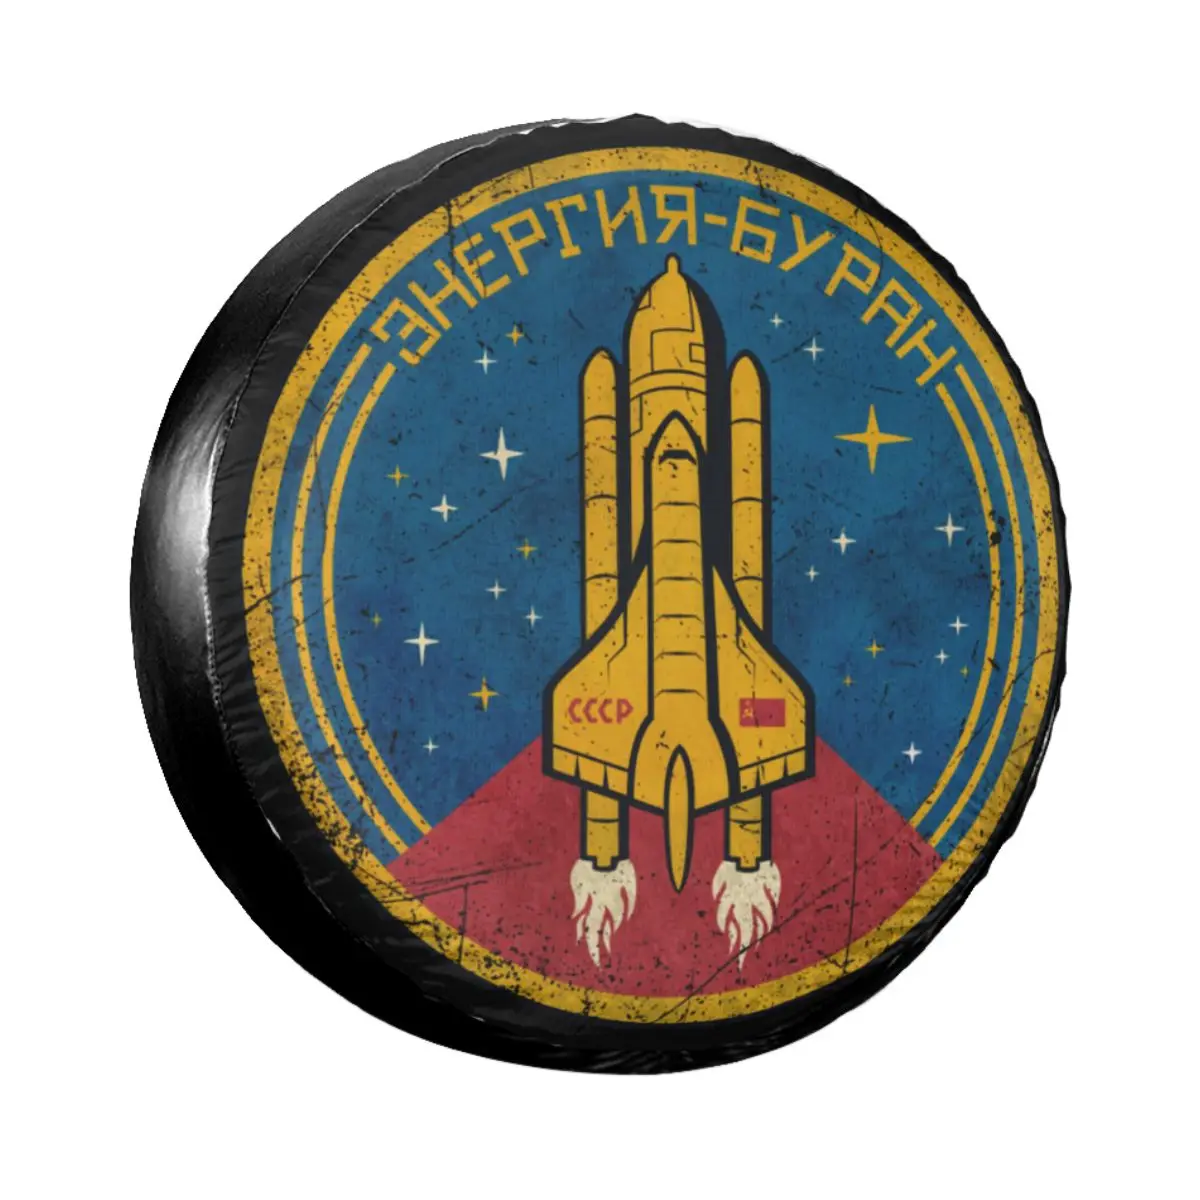 

Classic CCCP Space Shuttle Emblem Spare Tire Cover Case Bag Pouch USSR Rocket Wheel Covers for Mitsubishi 14" 15" 16" 17" Inch